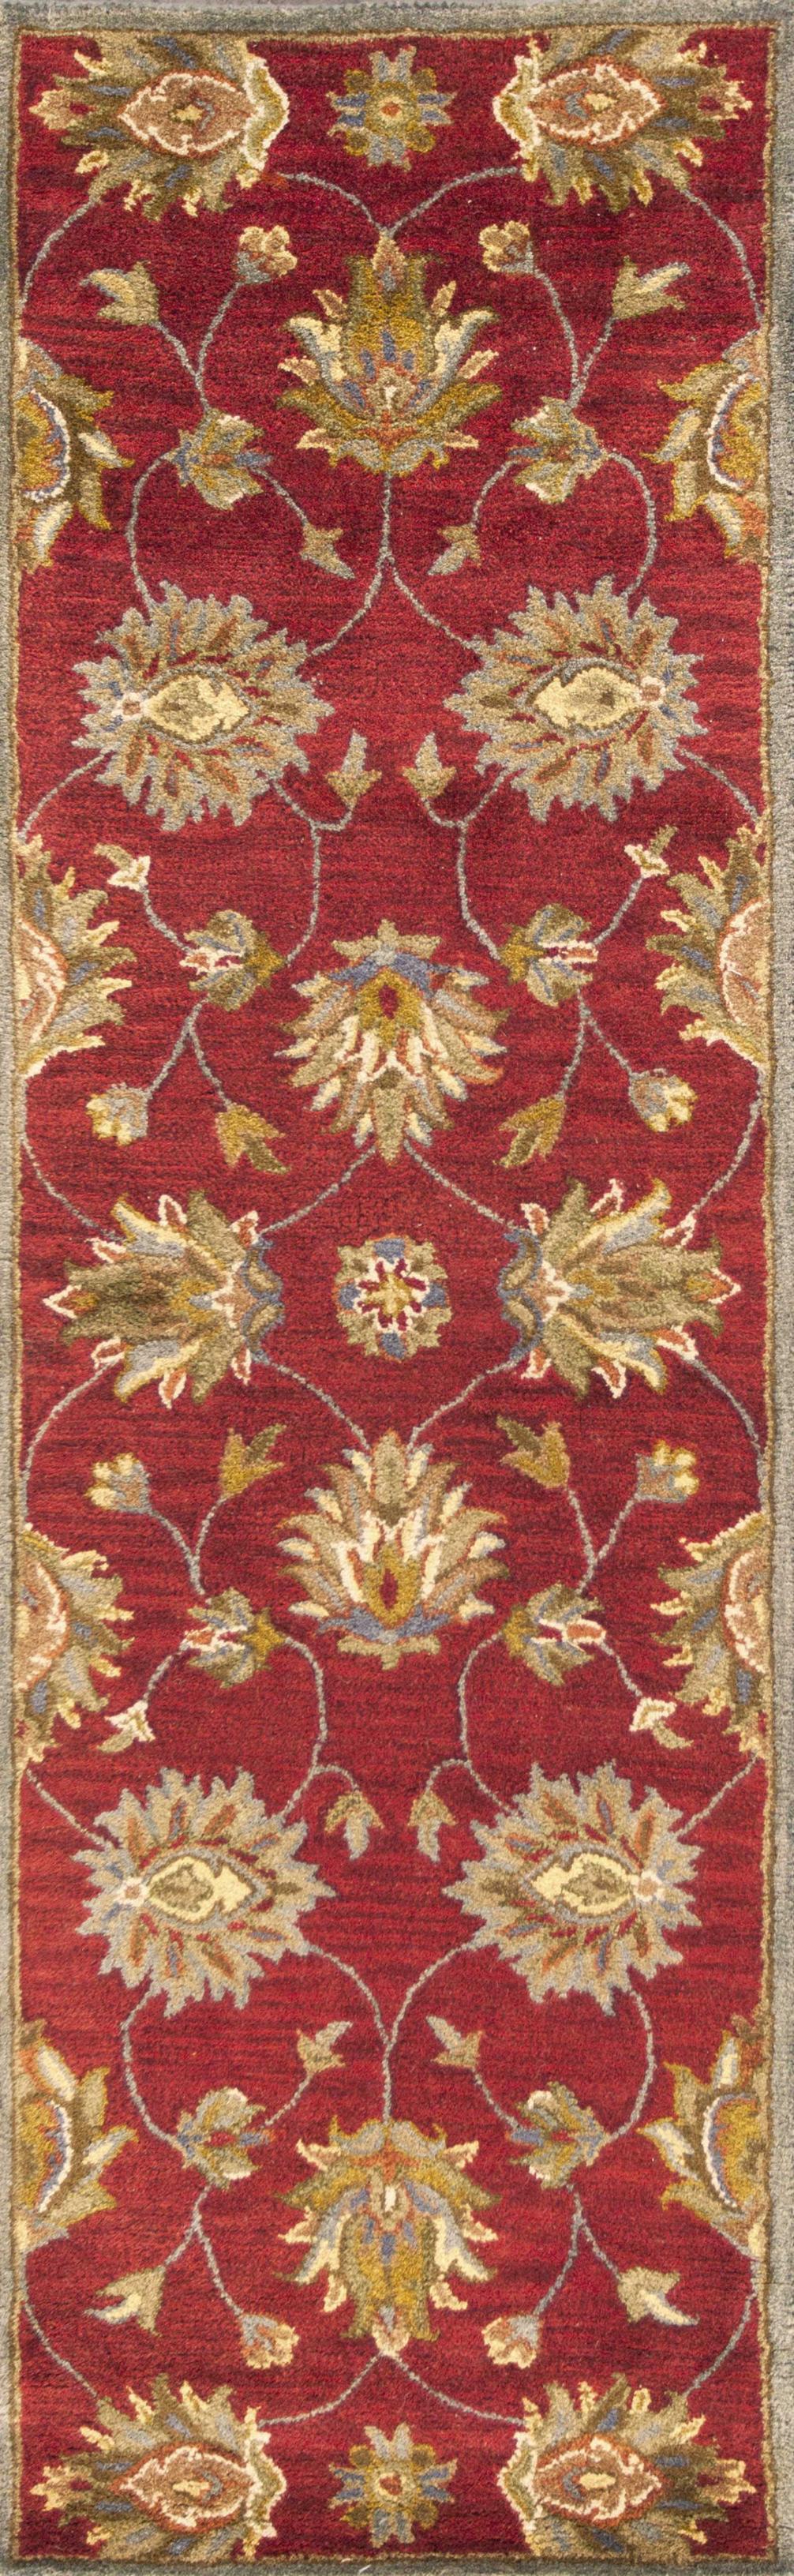 2' X 7' Red Floral Vines Bordered Wool Runner Rug - 99fab 